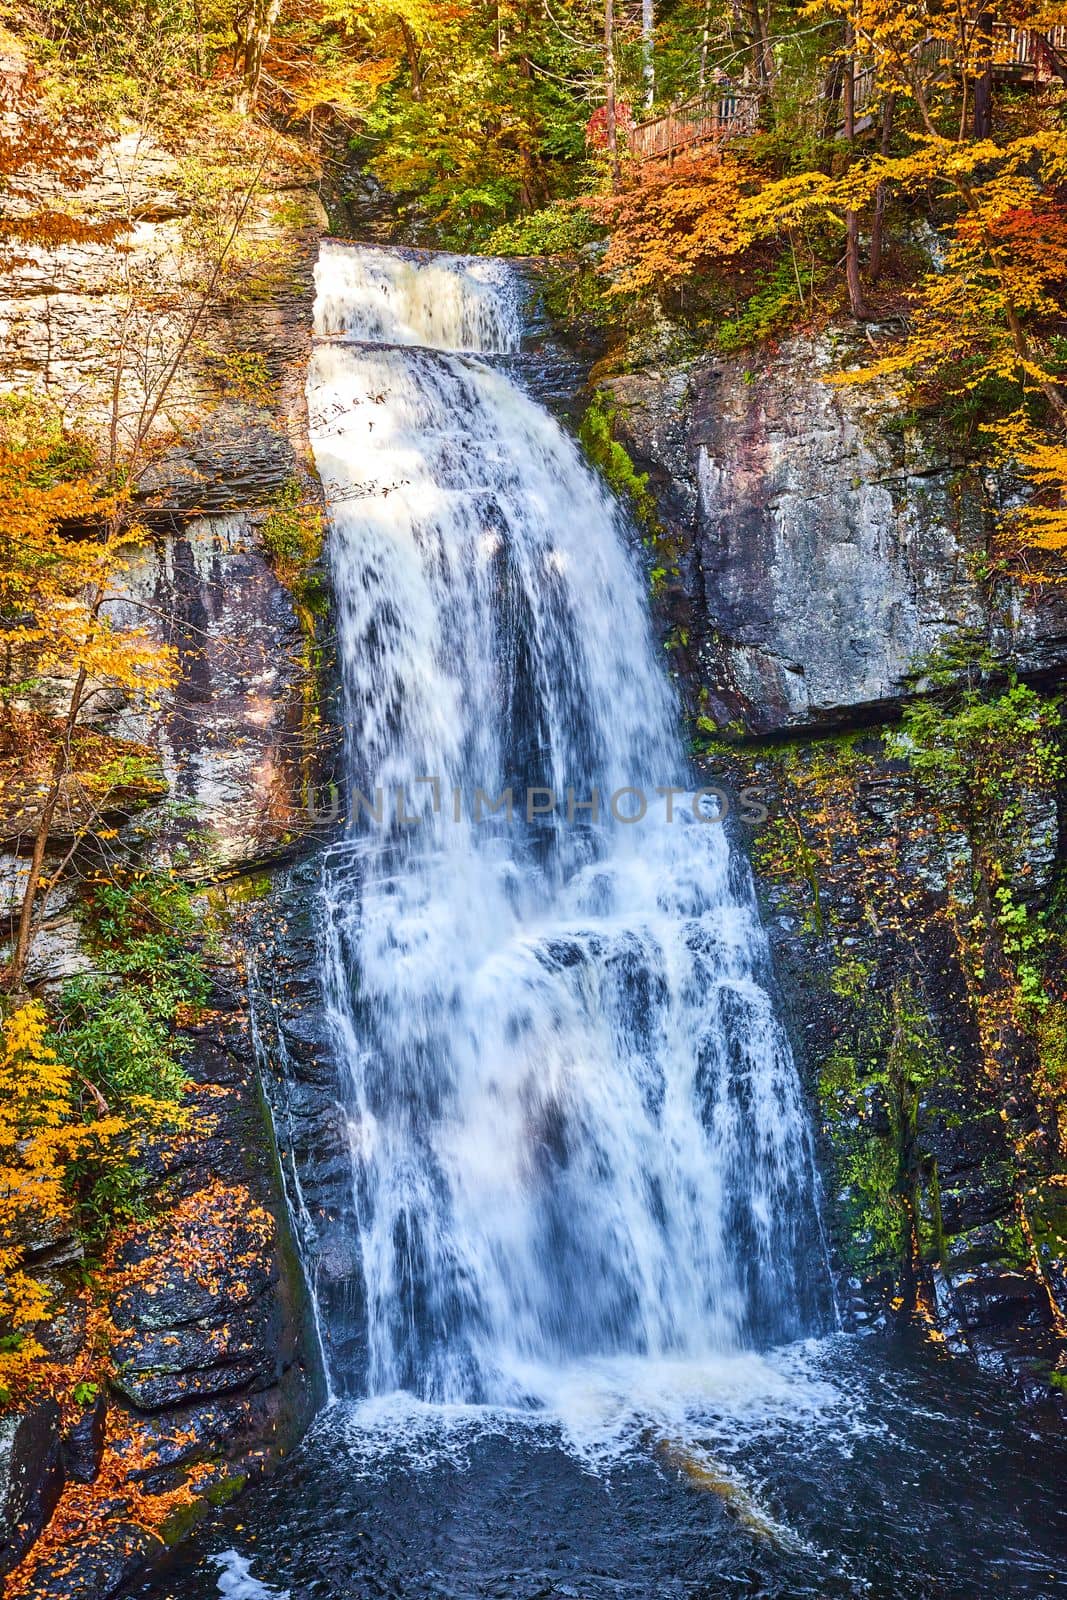 Image of Straight on huge waterfall over cliffs with harsh light and fall foliage around